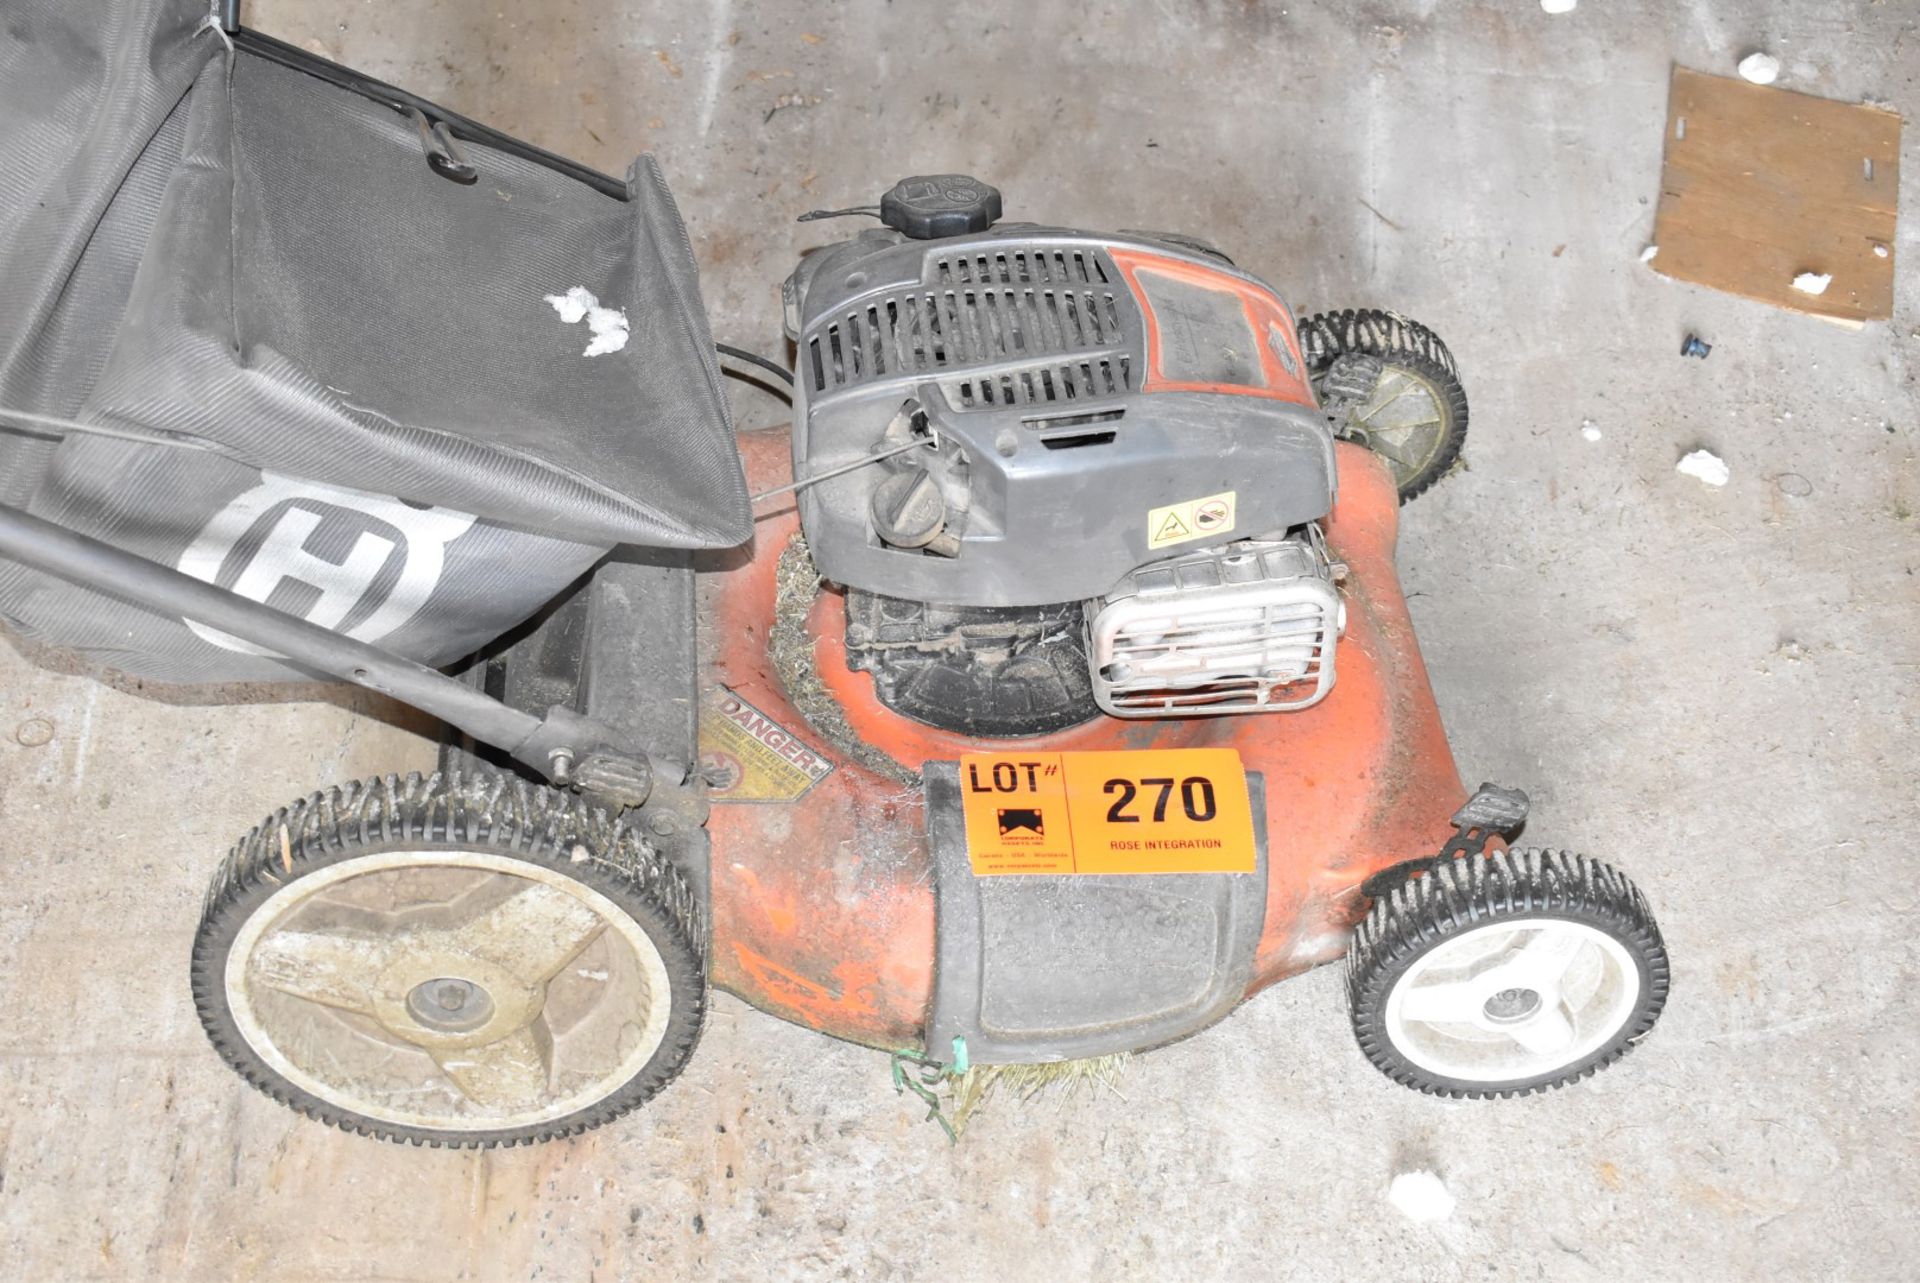 HUSQVARNA 6751P LAWN MOWER WITH BRIGGS & STRATTON 675EXI 163 CC ENGINE, S/N N/A - Image 2 of 3